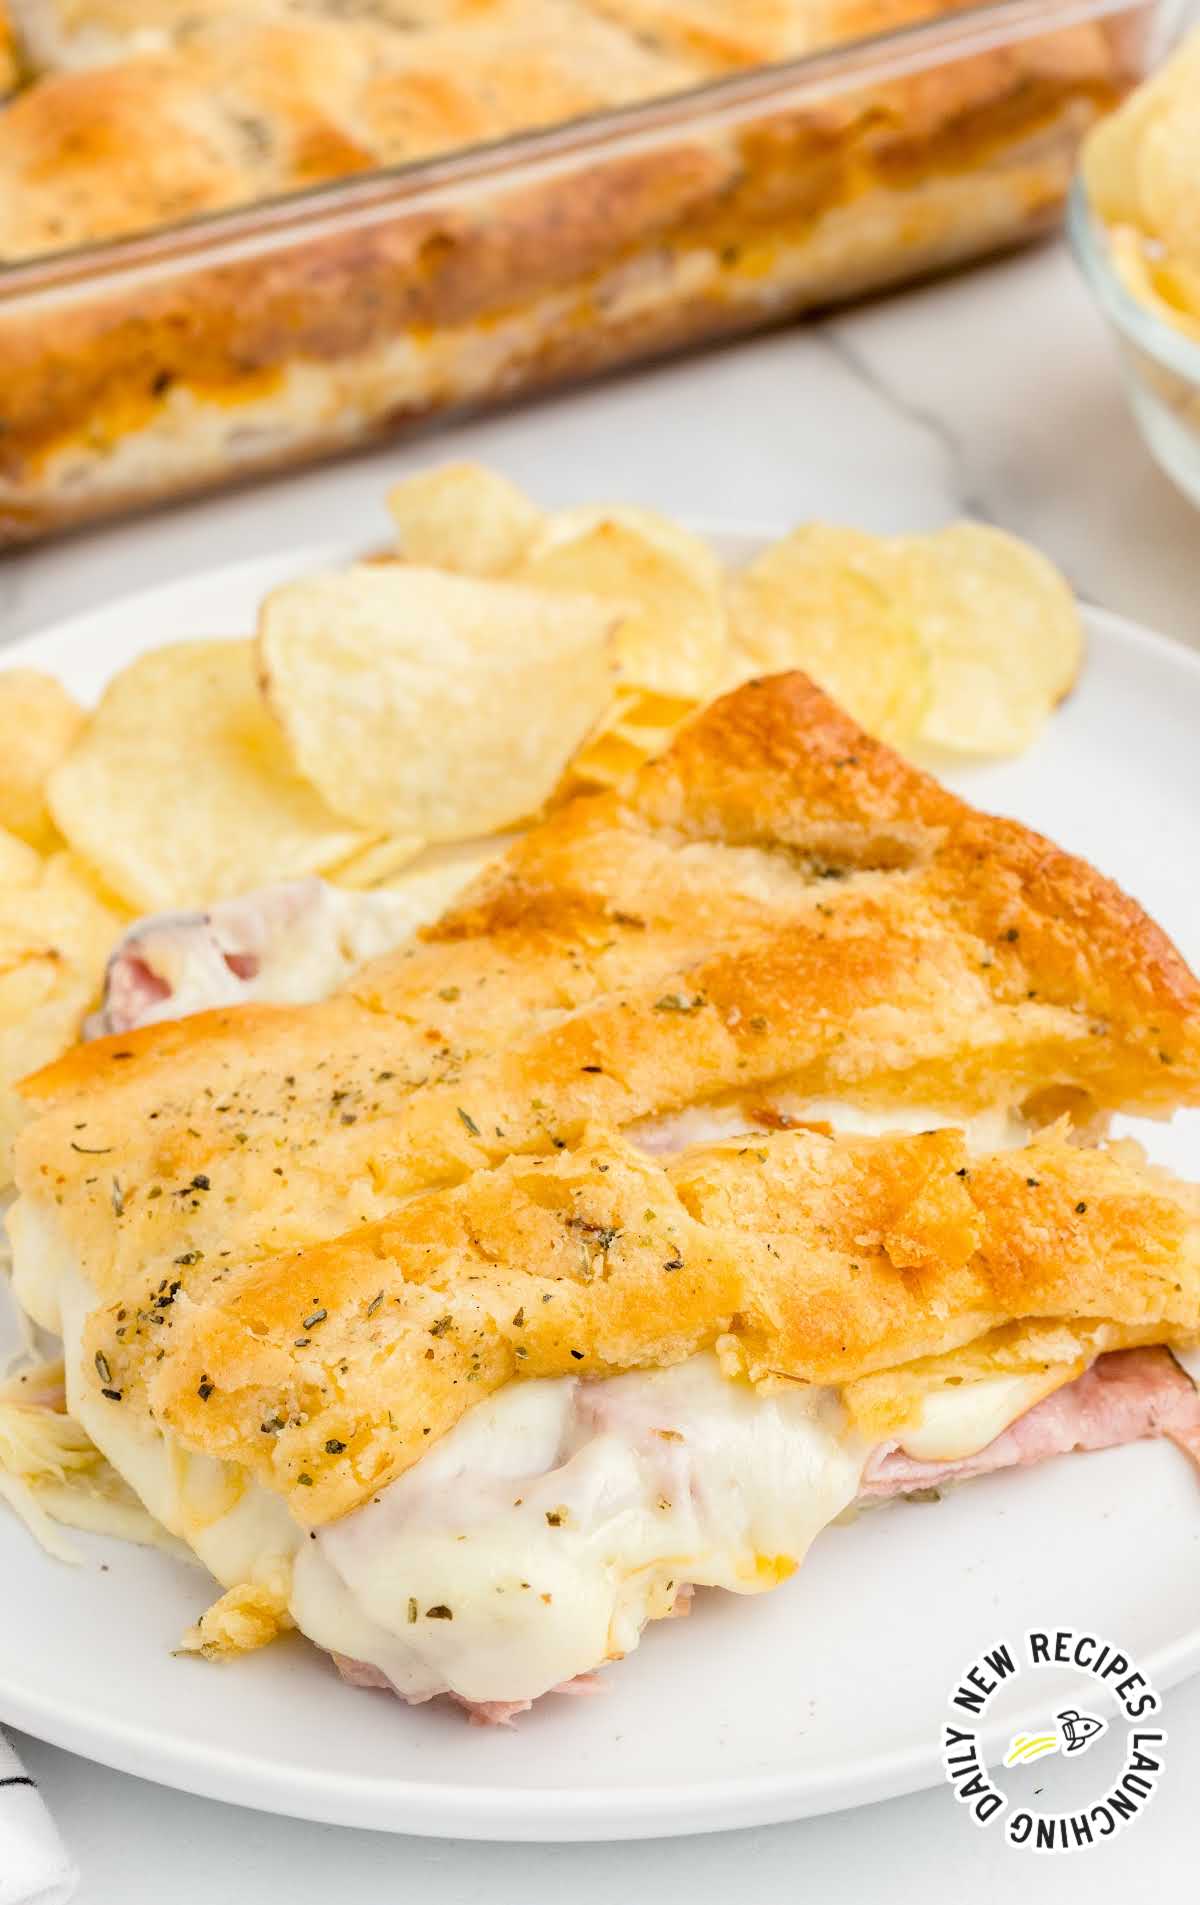 A piece of food on a plate, with Cheese and Ham